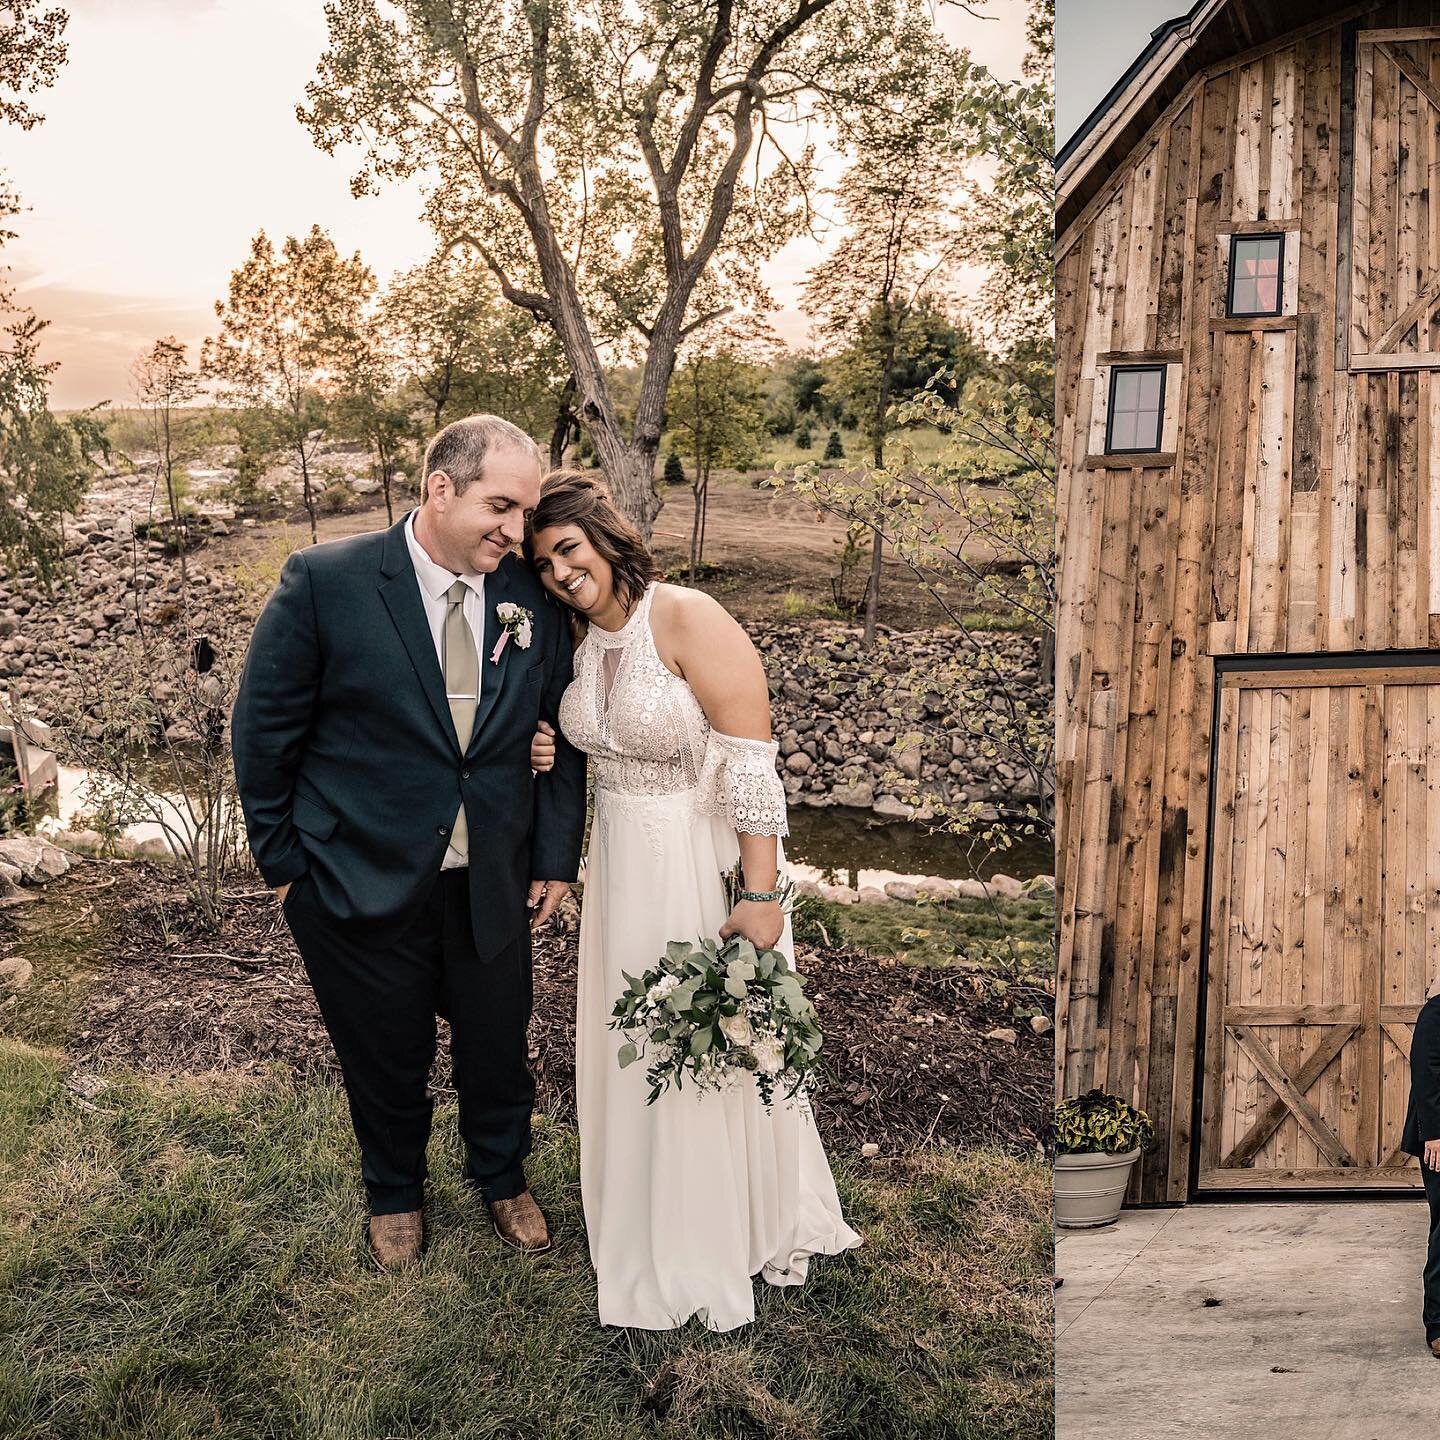 Hello perfect July 3rd wedding with two of my most favorite people ever. 

I&rsquo;ll share more of the rustic ranchy vibes from this day on my stories. Cuz I really cannot get enough! ✨